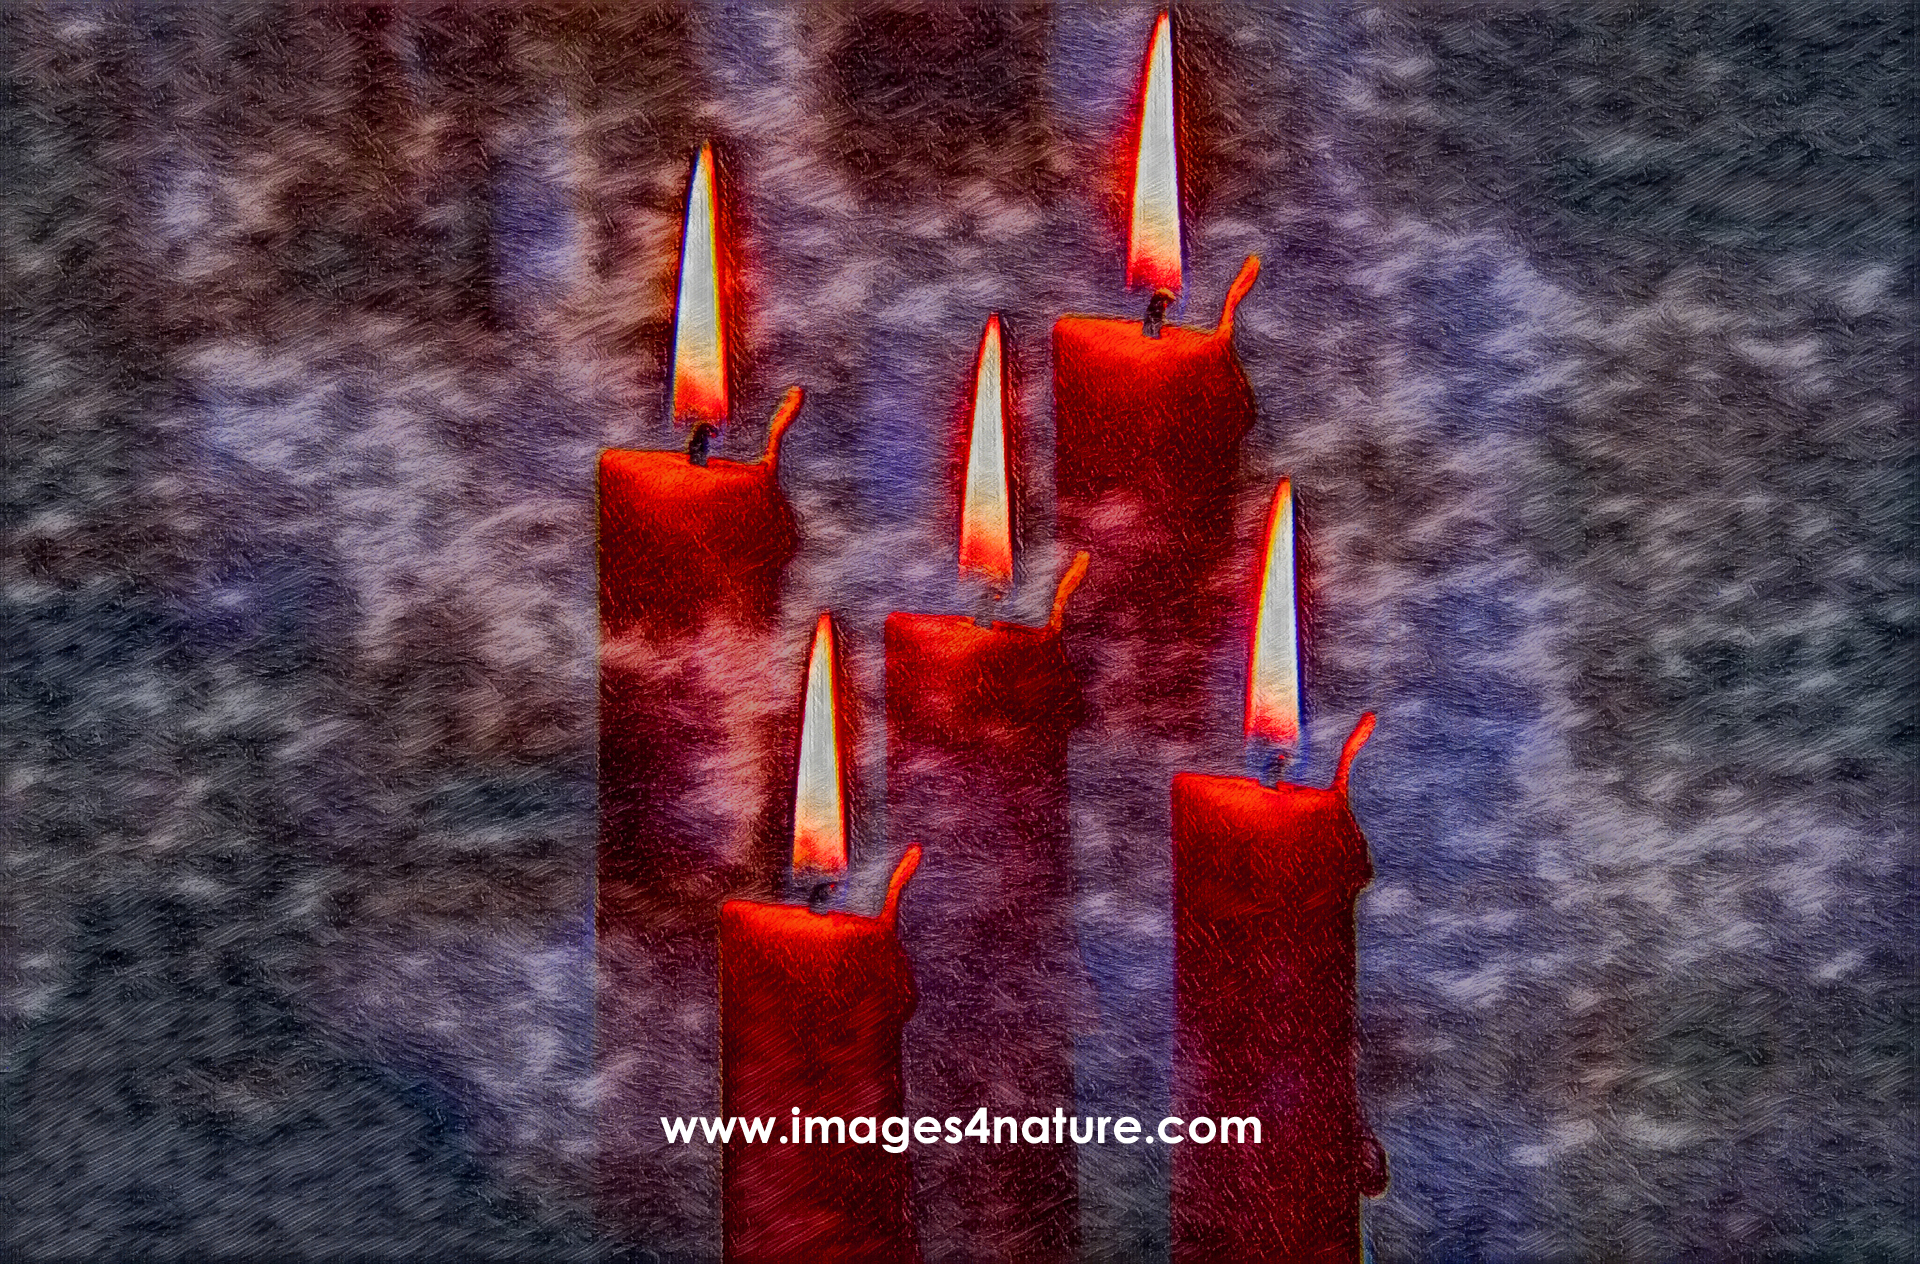 A painting-style photo of five red burning candles